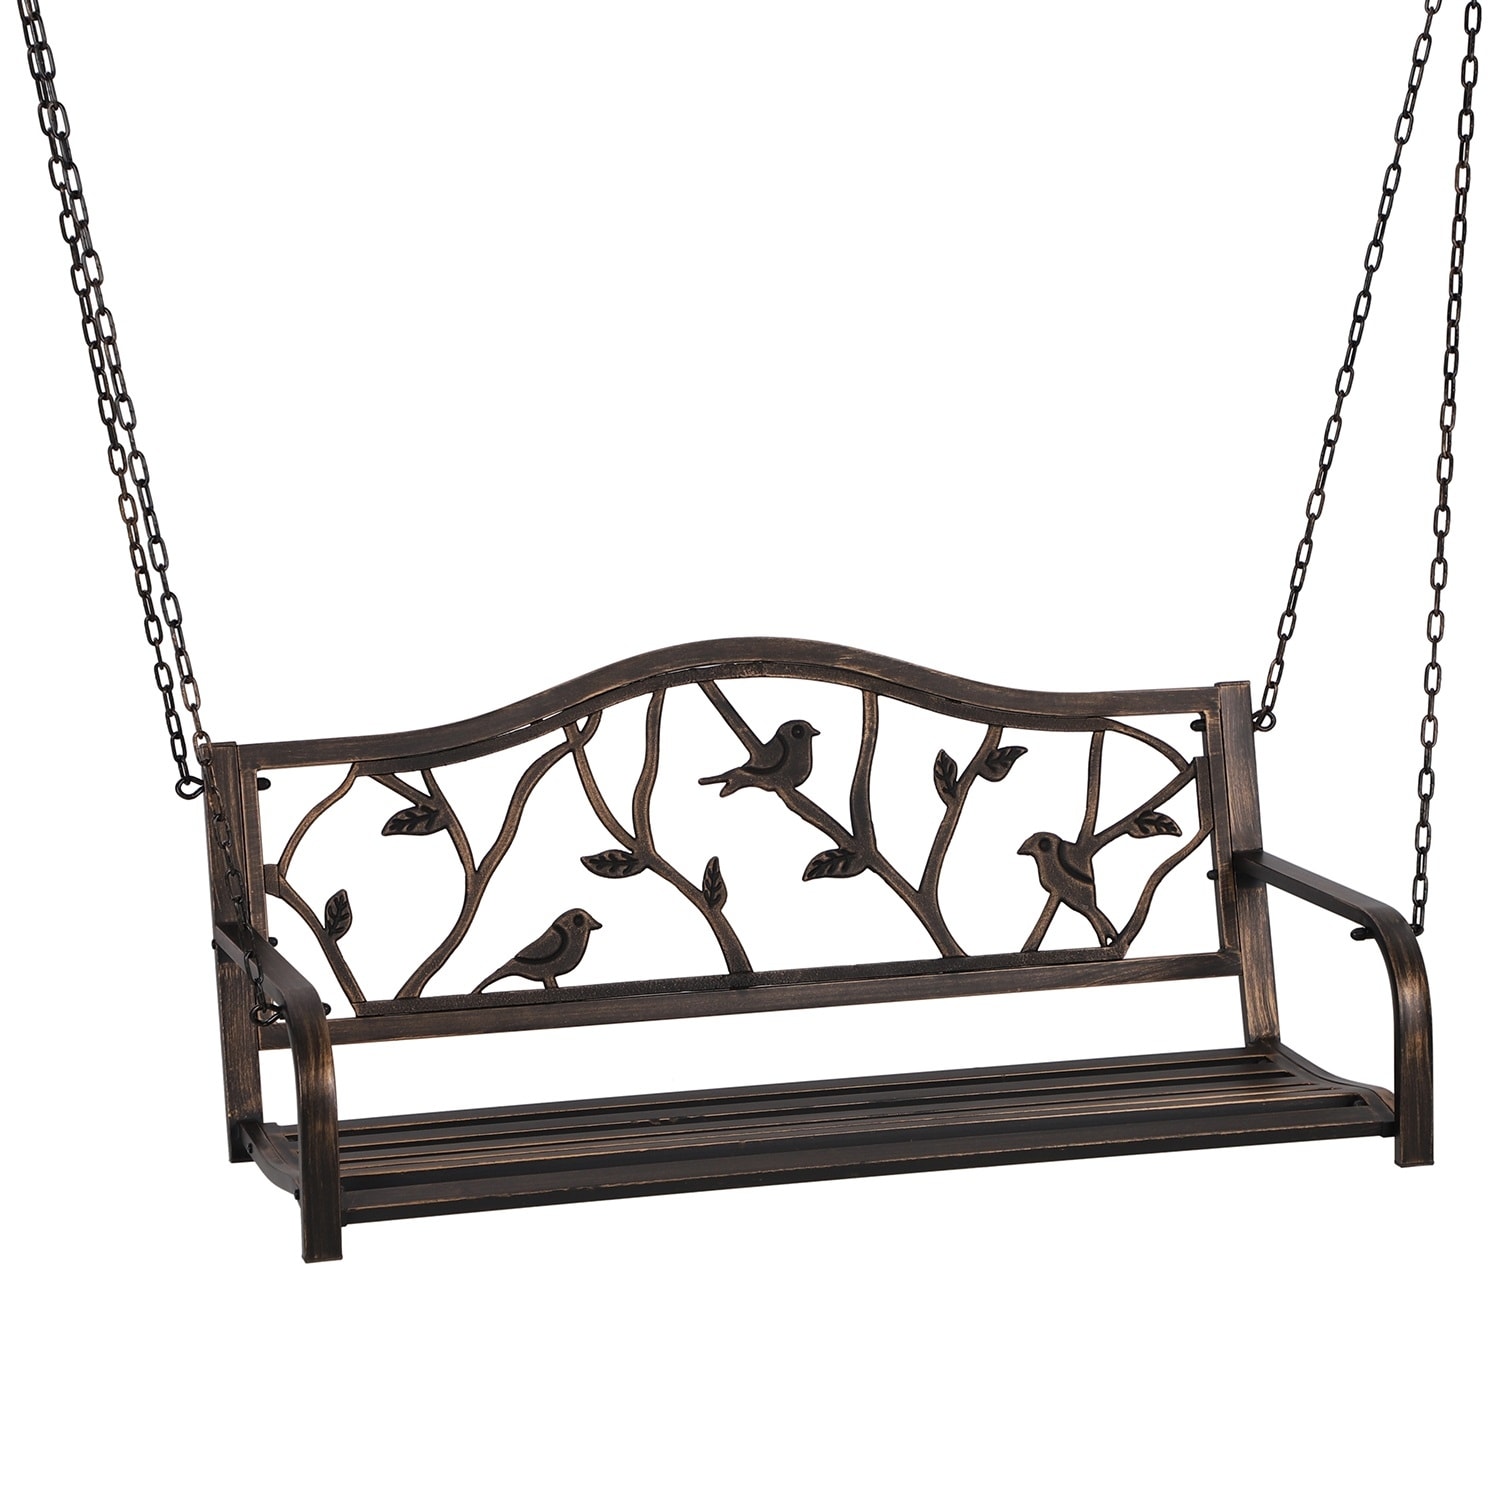 Phi Villa PHI VILLA 50 inch Cast Iron Porch Swing Bench, Outdoor Steel Weather Resistant Swing with Chains Vintage Loveseat